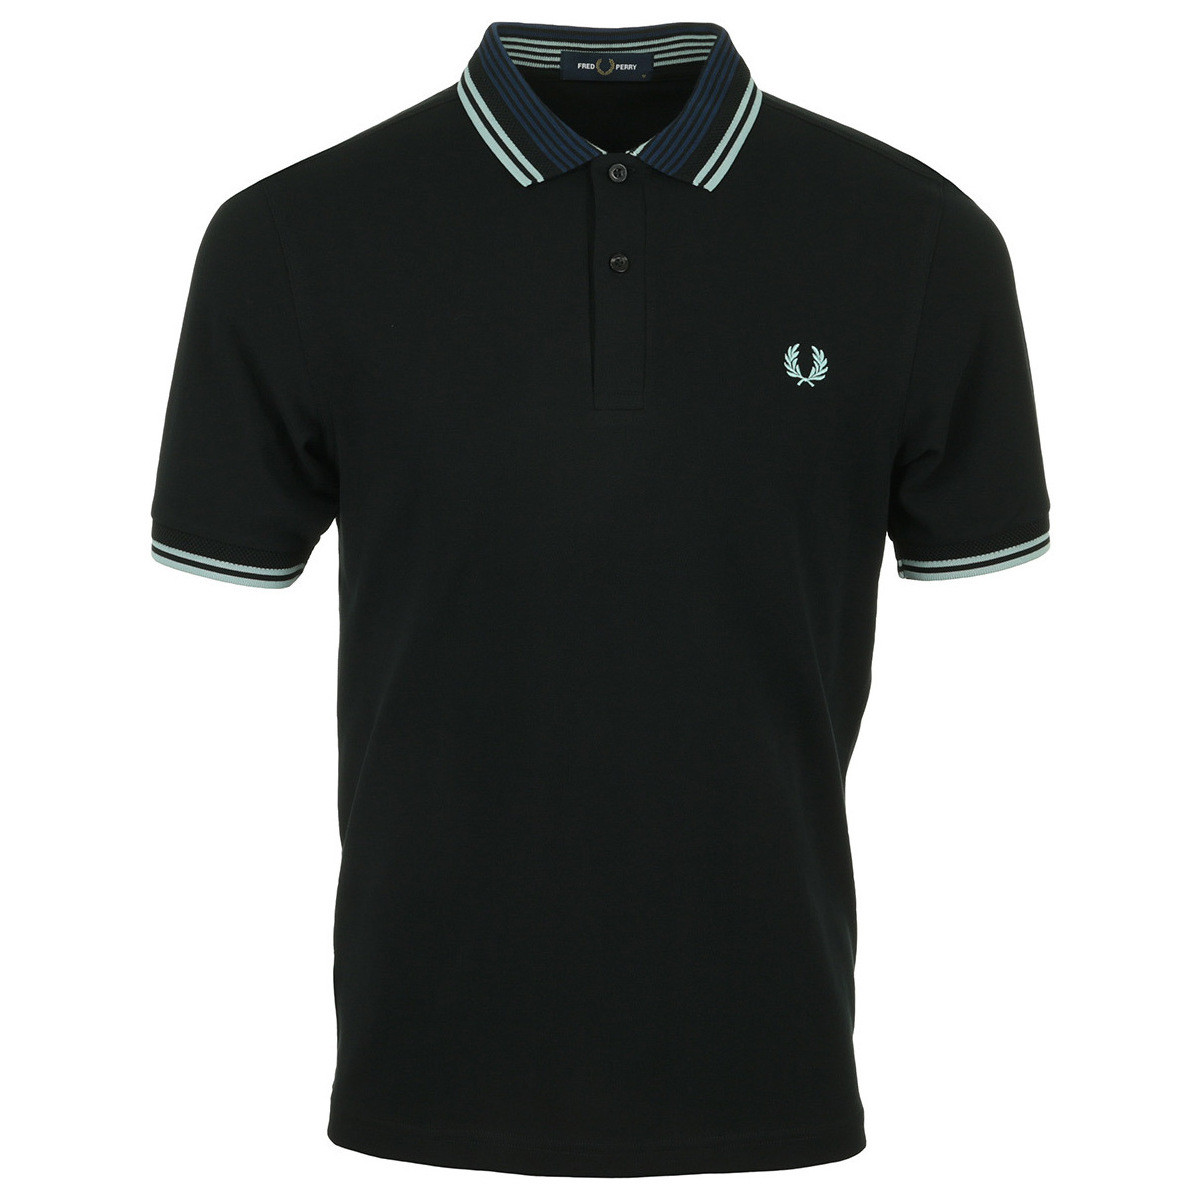 Vêtements Homme T-shirts & Polos Fred Perry Striped Collar Shirt Noir